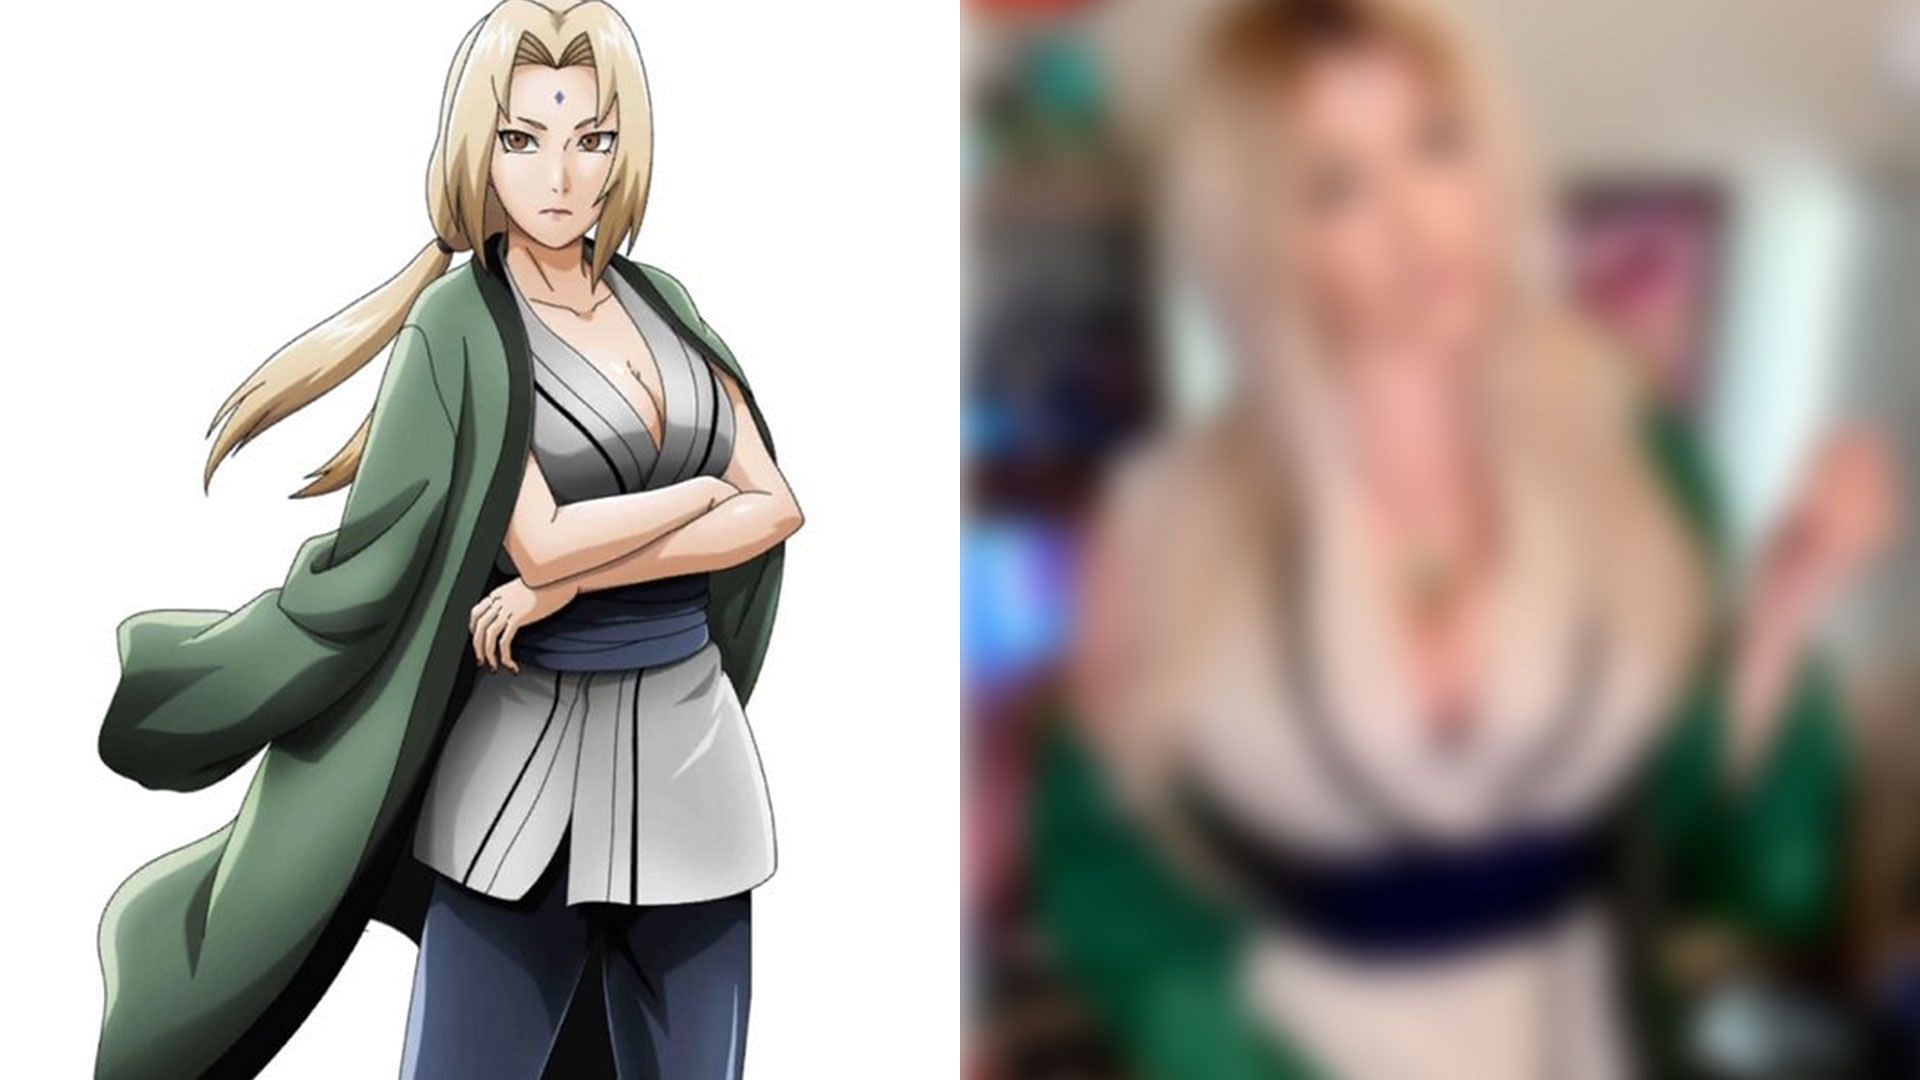 Naruto cosplayer raises the heat in the Tsunade makeover